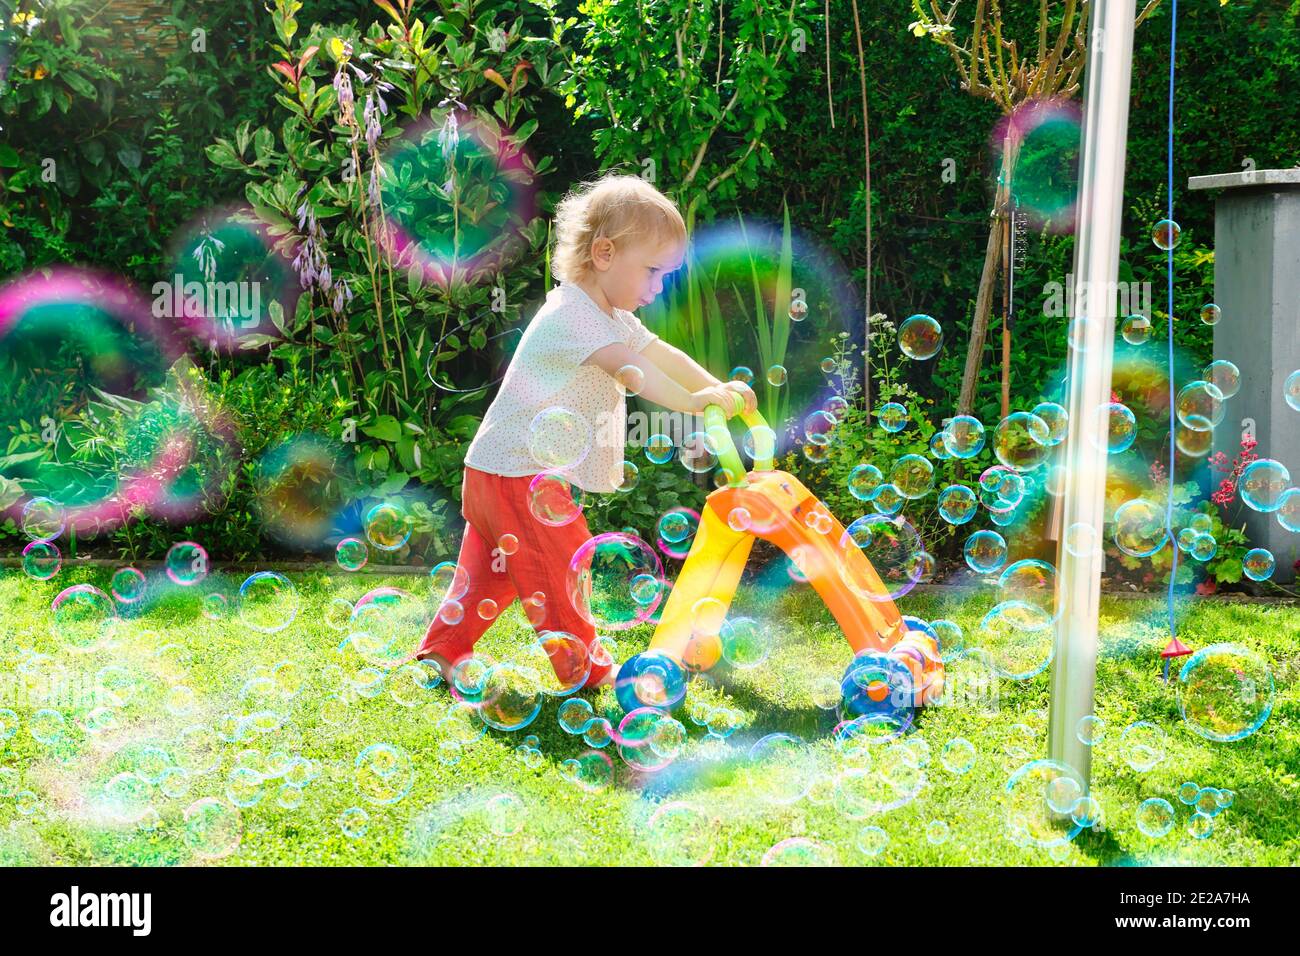 Child pushing wheeled toy in lush green backyard on sunny day. Soap bubbles in foreground. Profile view. Full length. Stock Photo